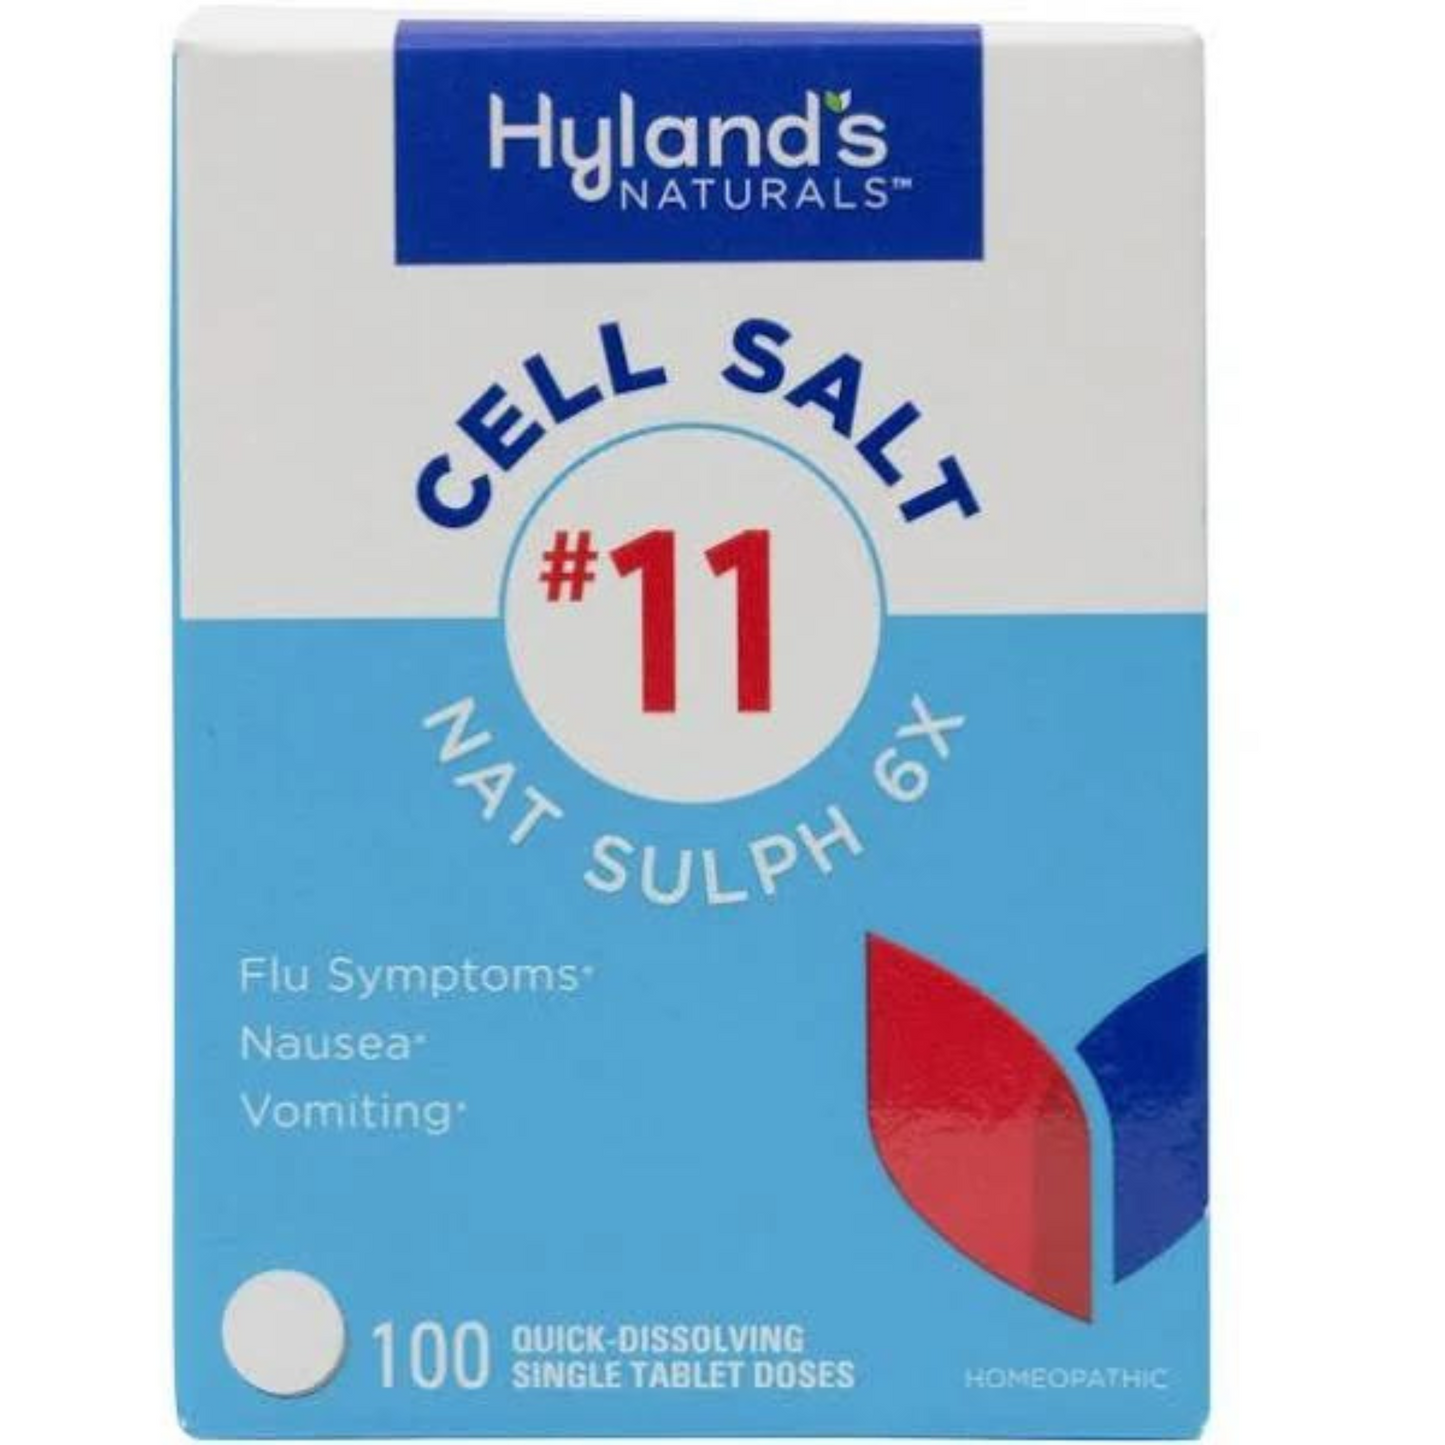 Primary Image of Hyland's Cell Salt Nat Sulph 6x Tablets (100 count)